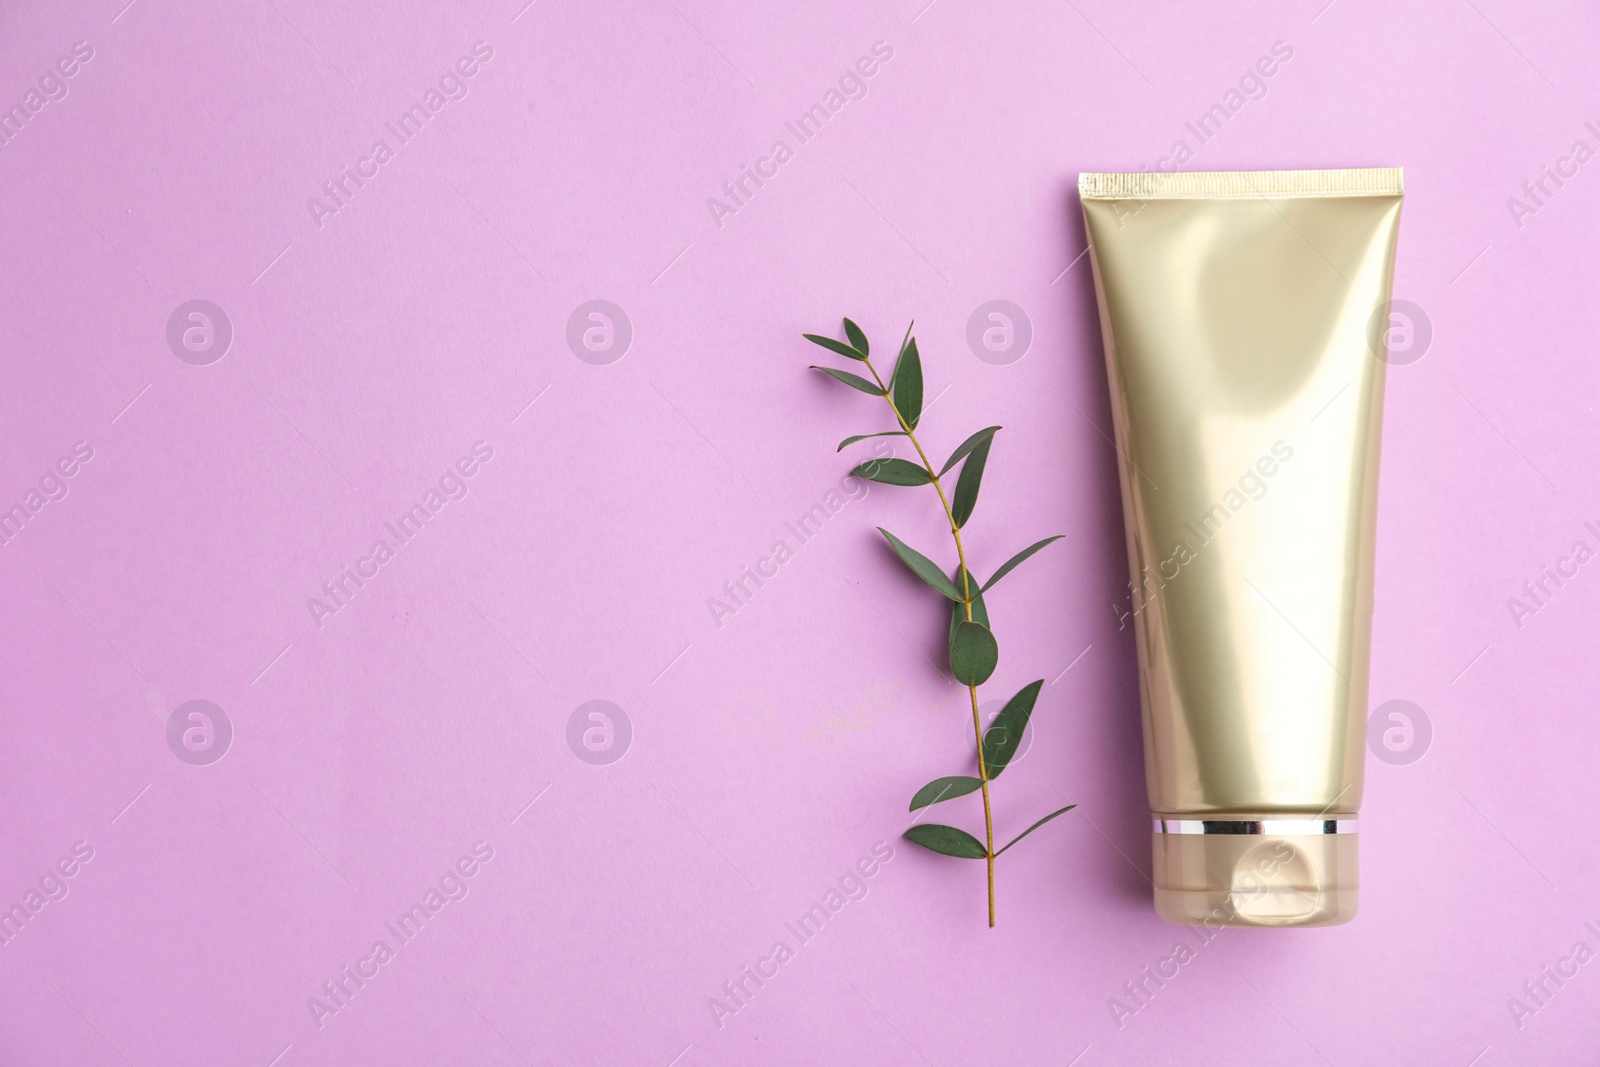 Photo of Hair cosmetic product and green branch on lilac background, flat lay. Space for text